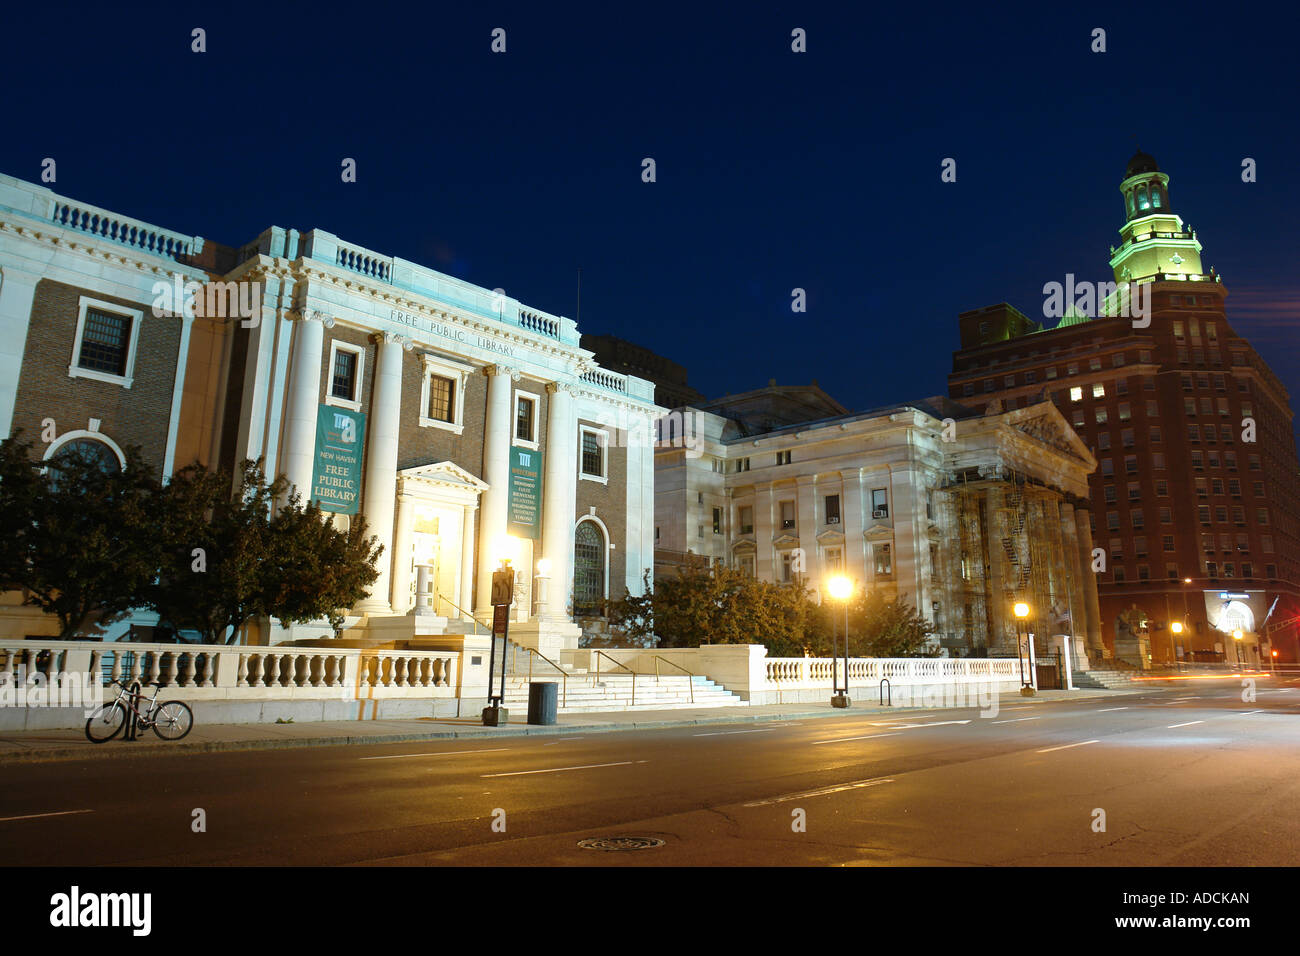 AJD58517, New Haven, CT, Connecticut, Downtown, Free Public Library, evening Stock Photo